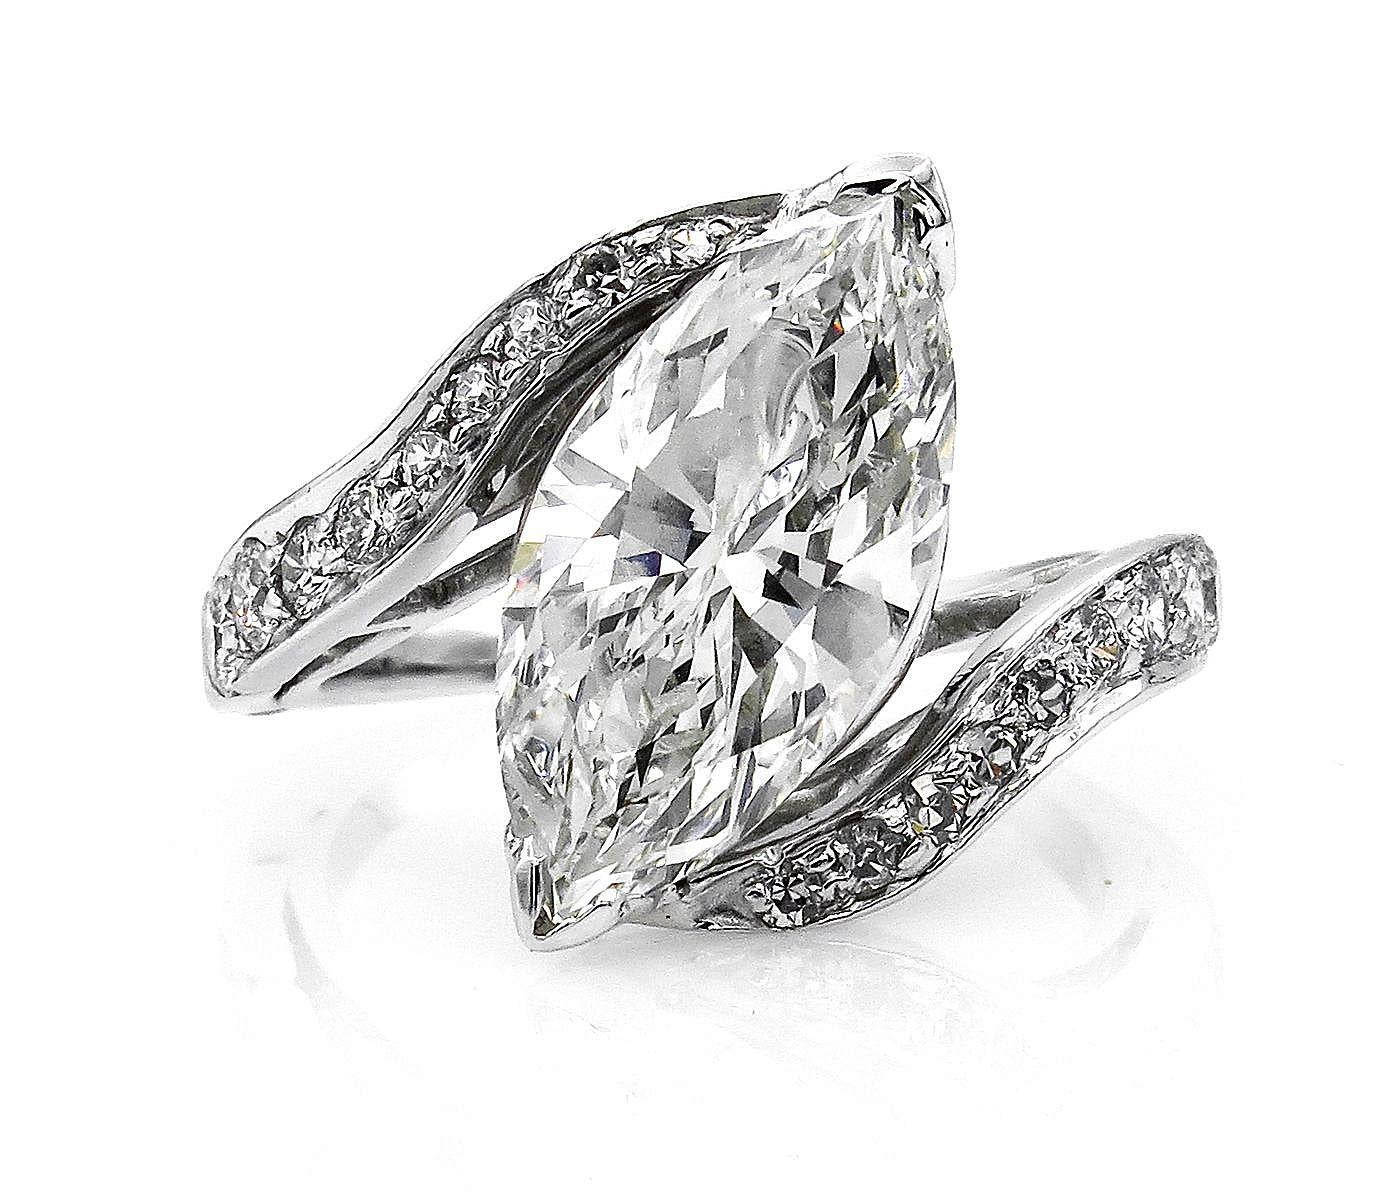 This dramatic and dynamic, uniquely Fabulous vintage Diamond ring explodes in a blaze of bright white diamonds weighing 3.70 carats total ( estimated).
Great opportunity to own Large, NATURAL, NOT treated, NOT Enhanced diamond at the amazing price!!